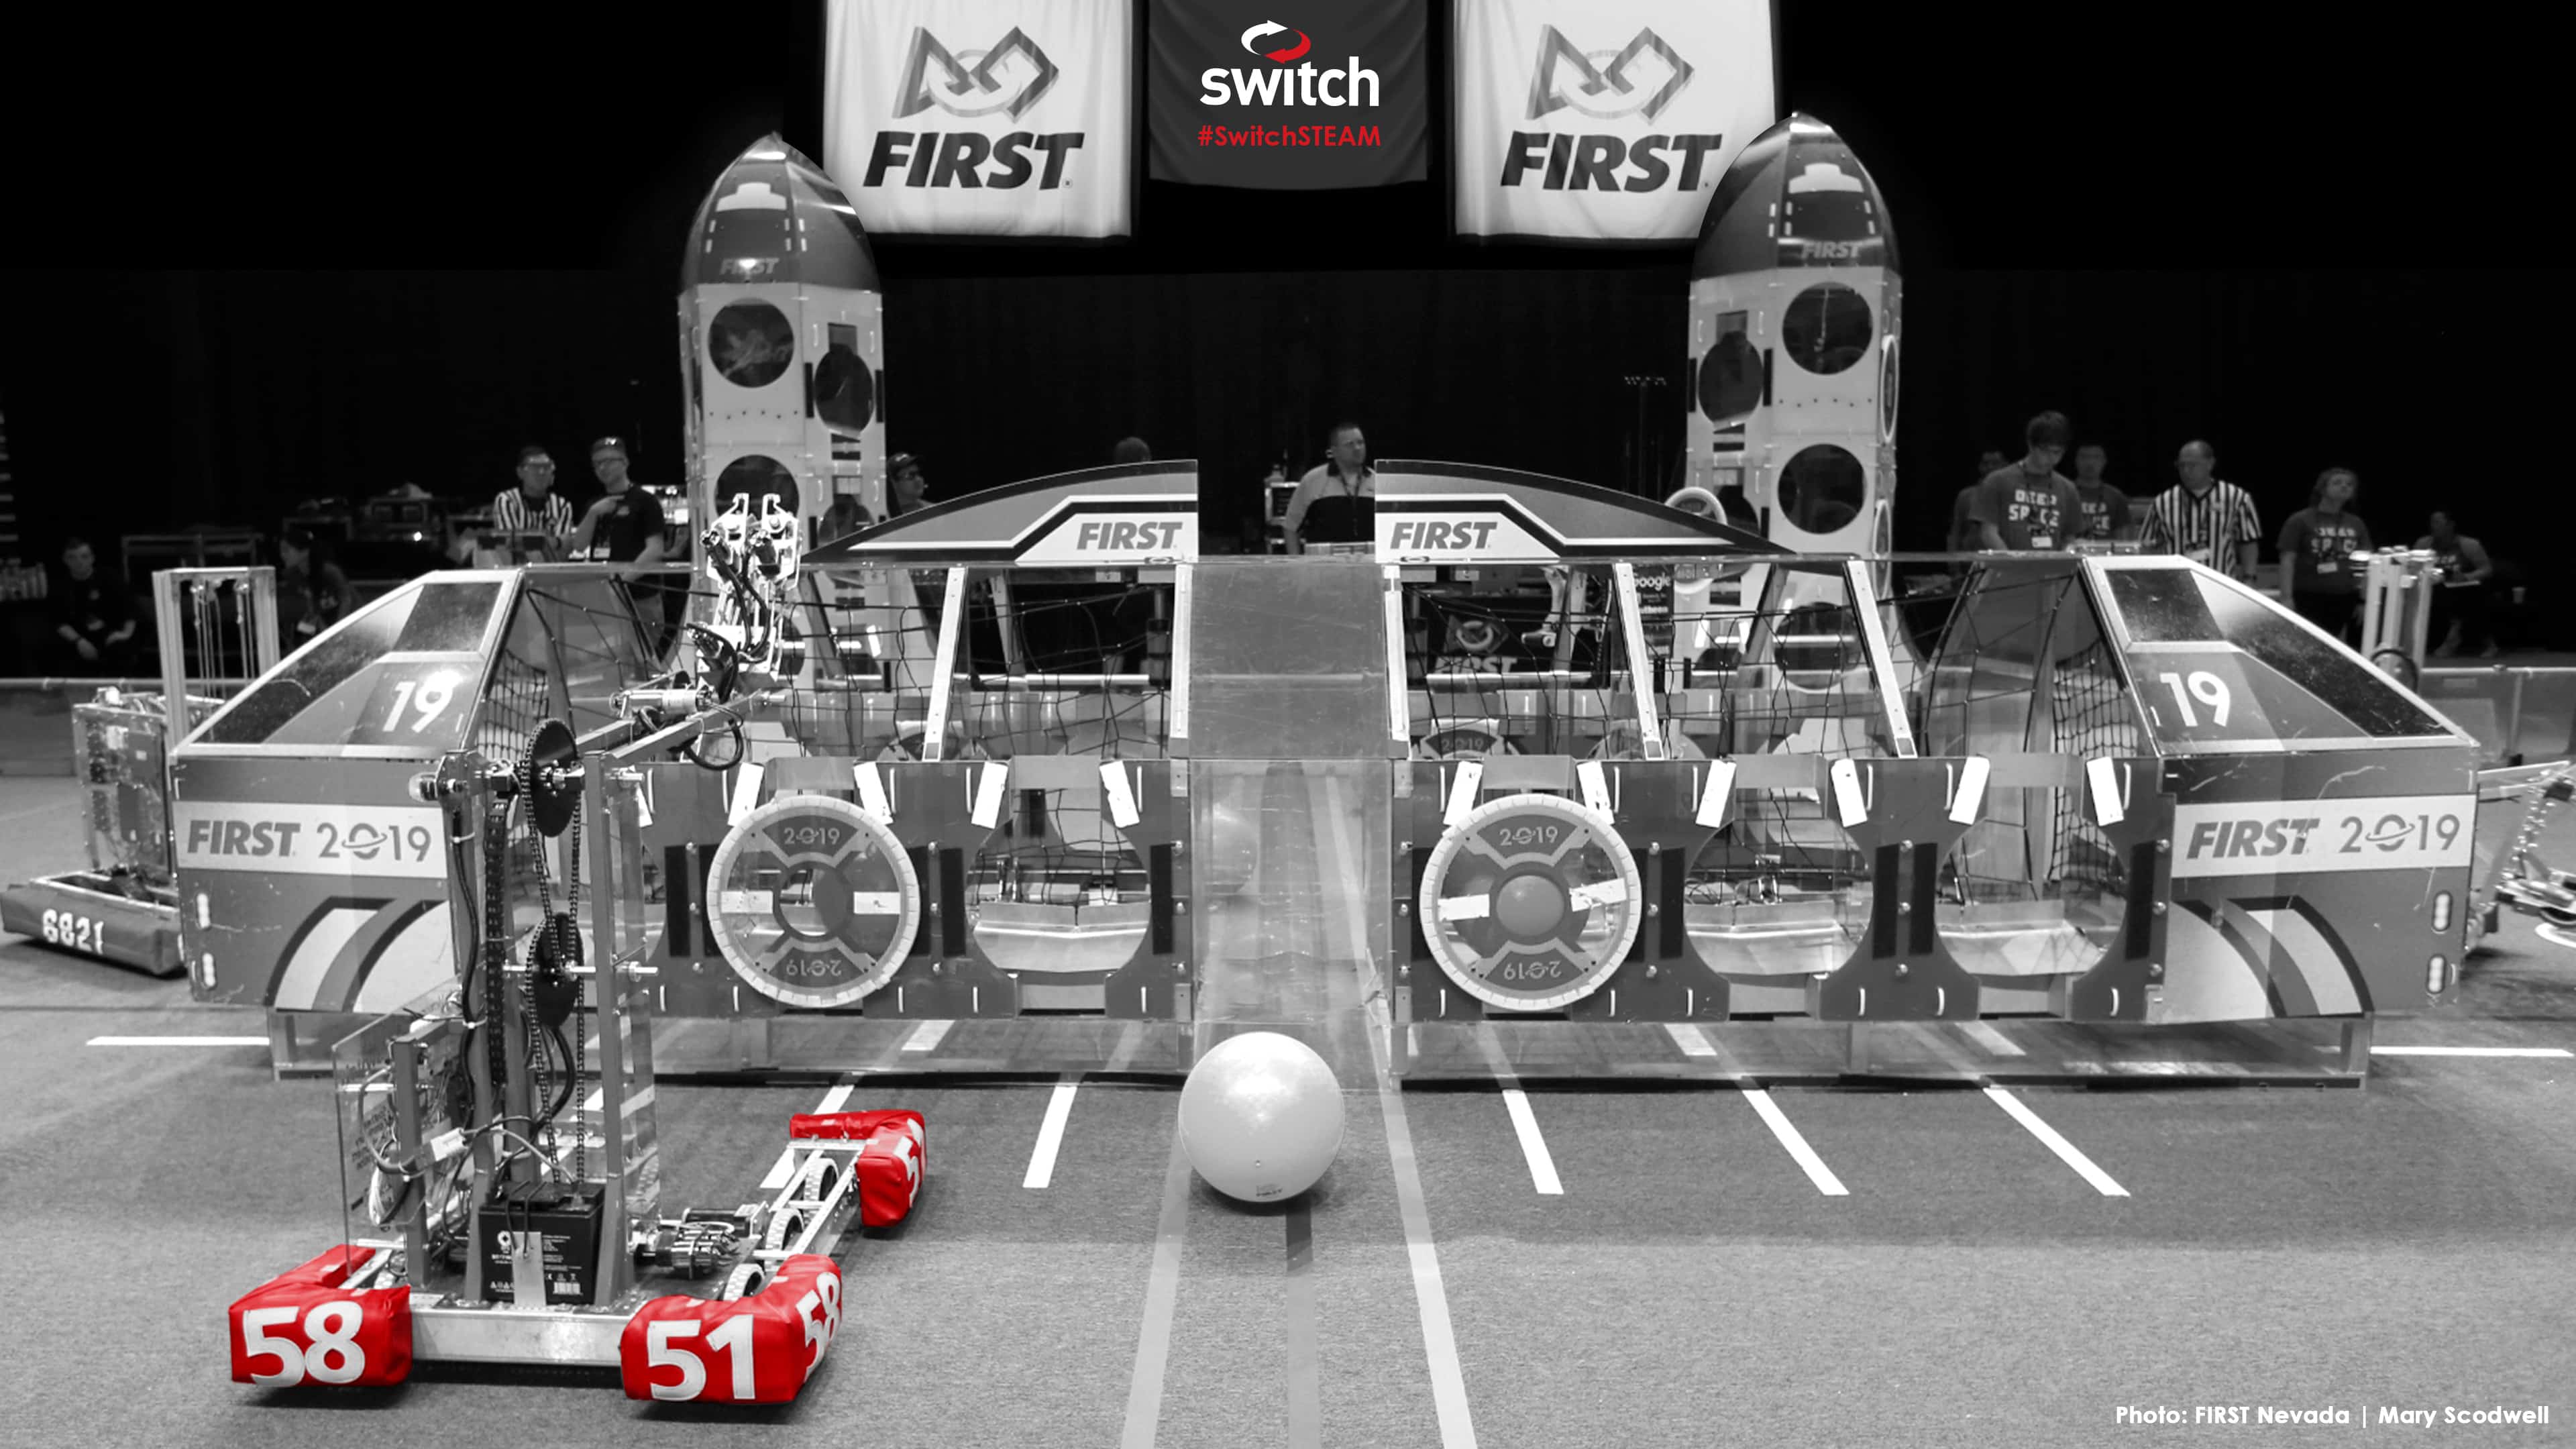 Switch Expands National FIRST<sup><small>®</small></sup> Robotics Partnership with GeorgiaFIRST<sup><small>®</small></sup> Symposium and FIRST<sup><small>®</small></sup> Tech Challenge Kickoff Sponsorship